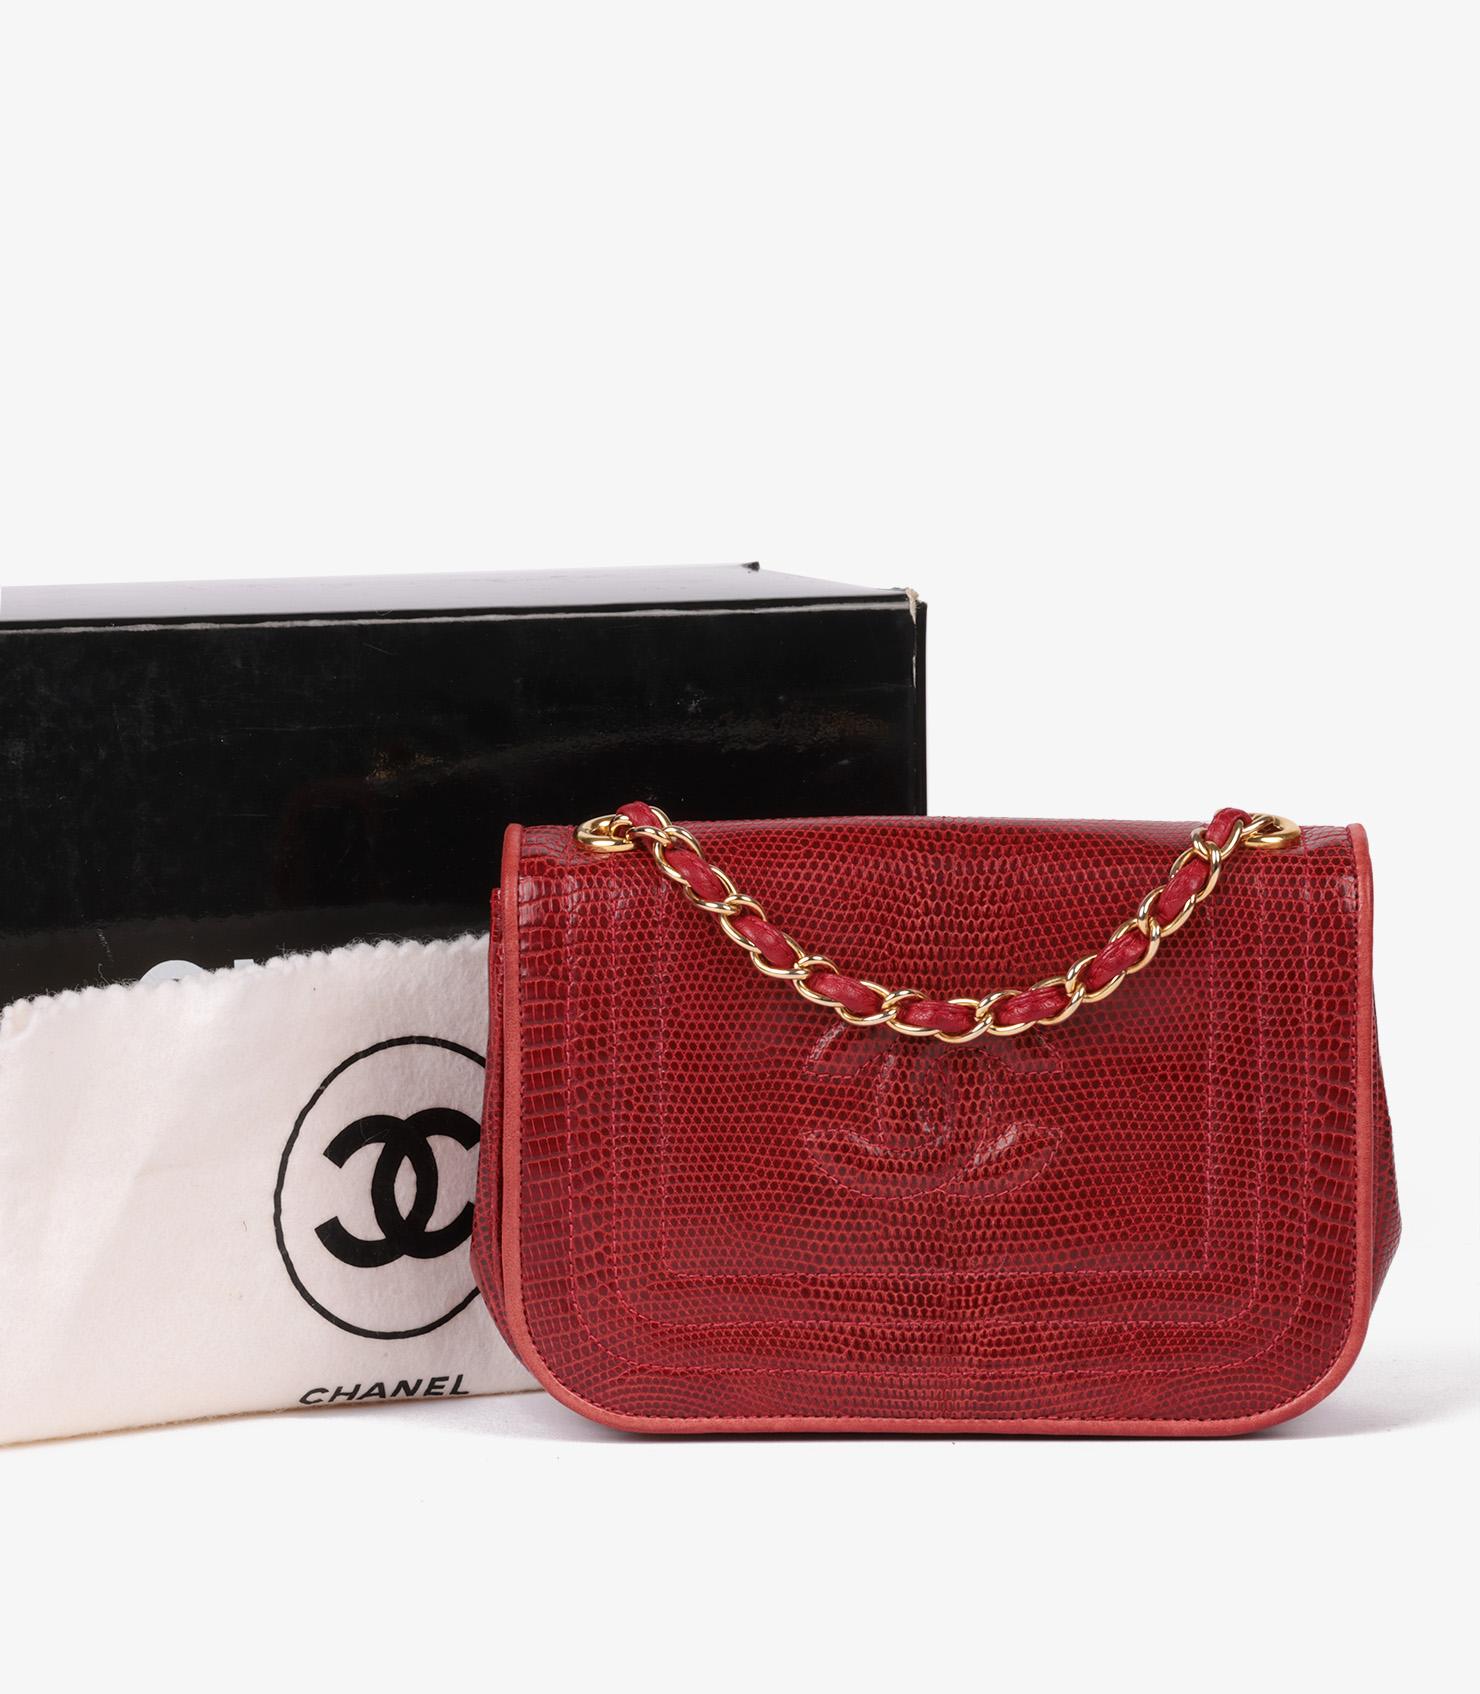 Chanel Red Lizard Leather Vintage Timeless Mini Flap Bag 6